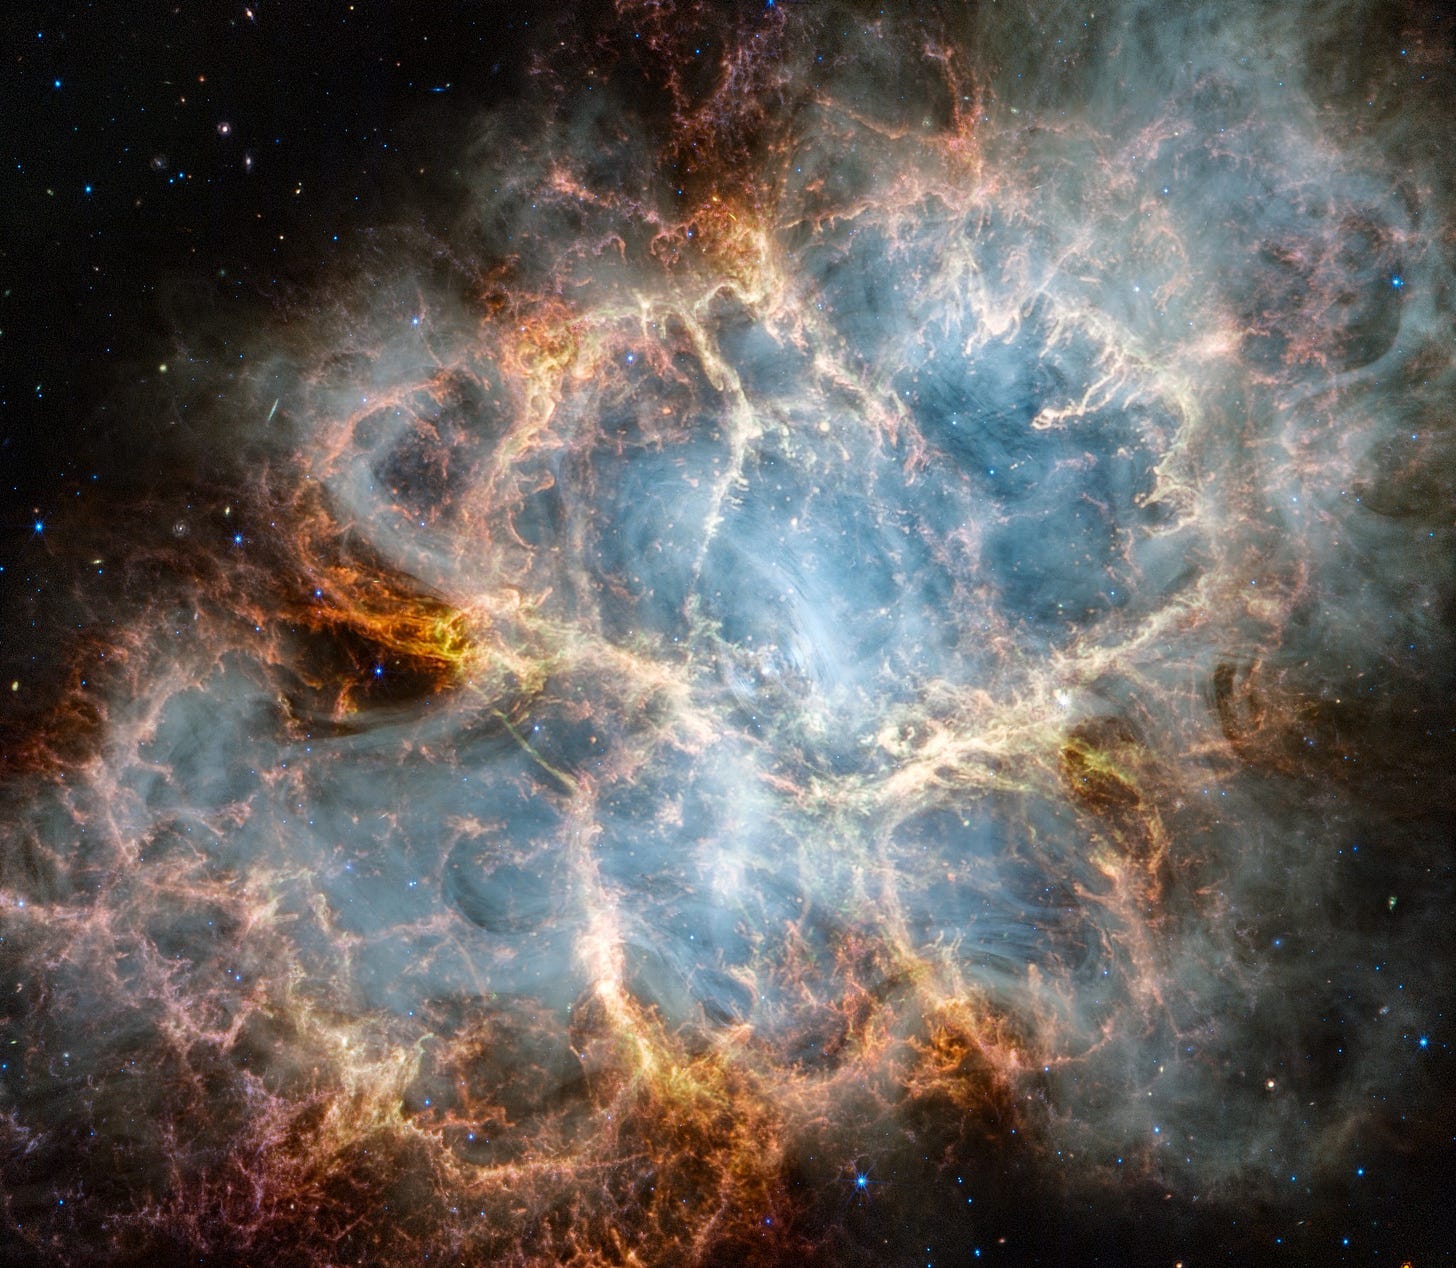 Webb image of the Crab Nebula. An oval nebula with complex structure against a black background. On the nebula’s exterior, particularly at the top left and bottom left, lie curtains of glowing red and orange fluffy material. Its interior shell shows large-scale loops of mottled filaments of yellow-white and green, studded with clumps and knots. Translucent thin ribbons of smoky white lie within the remnant’s interior, brightest toward its center. The white material follows different directions throughout, including sometimes sharply curving away from certain regions within the remnant. A faint, wispy ring of white material encircles the very center of the nebula. Around and within the supernova remnant are many points of blue, red, and yellow light.